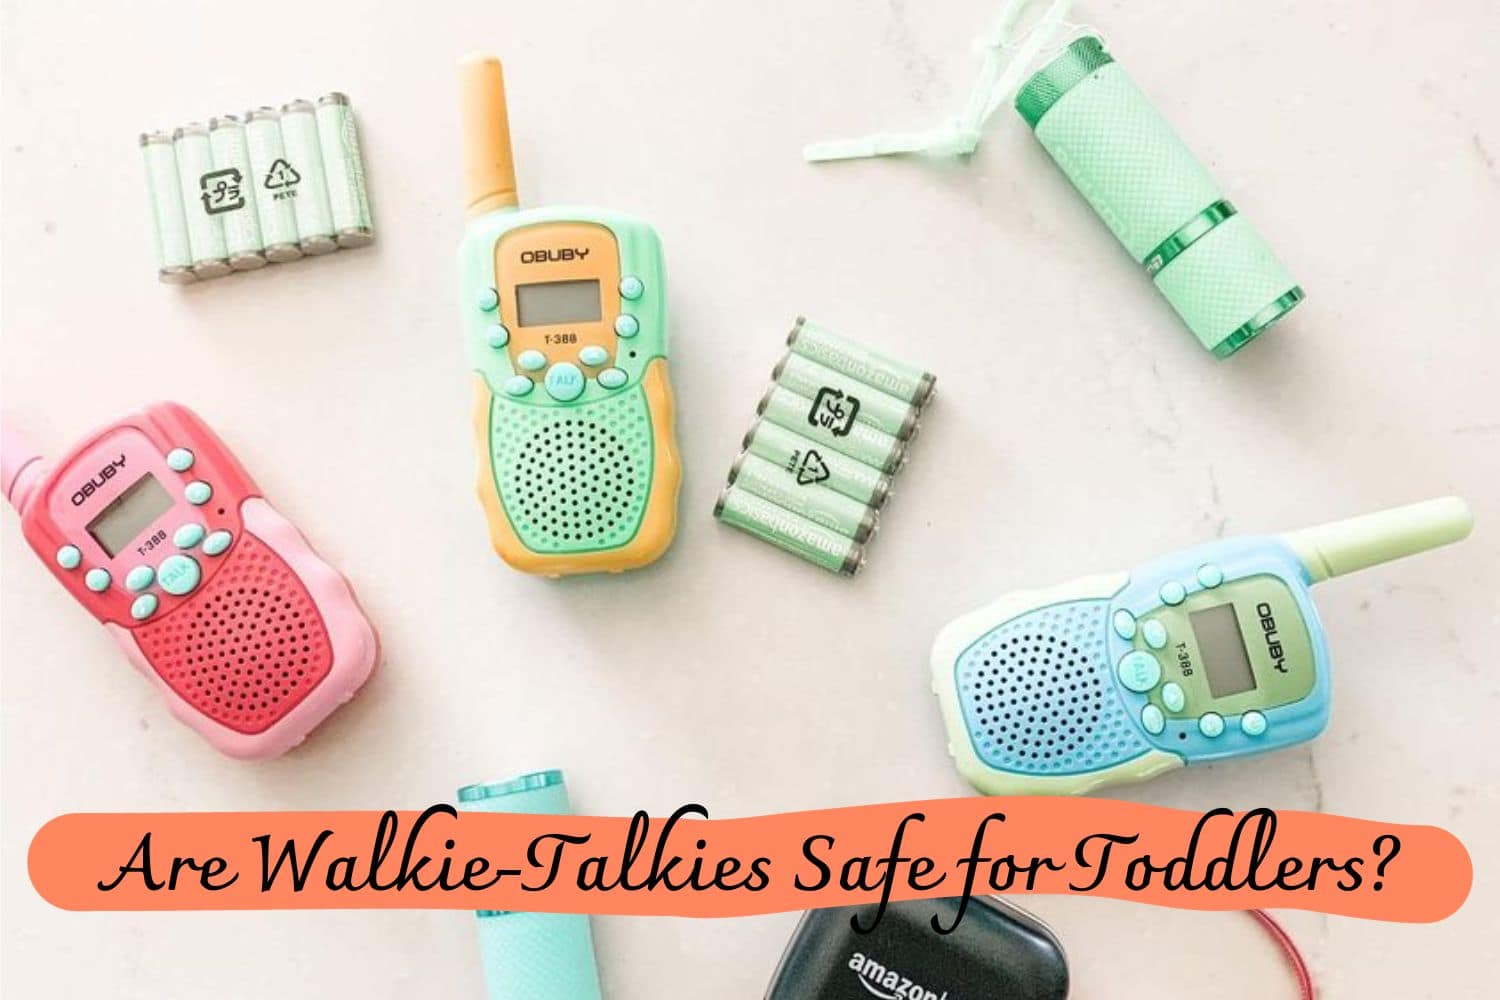 Are Walkie-Talkies Safe for Toddlers